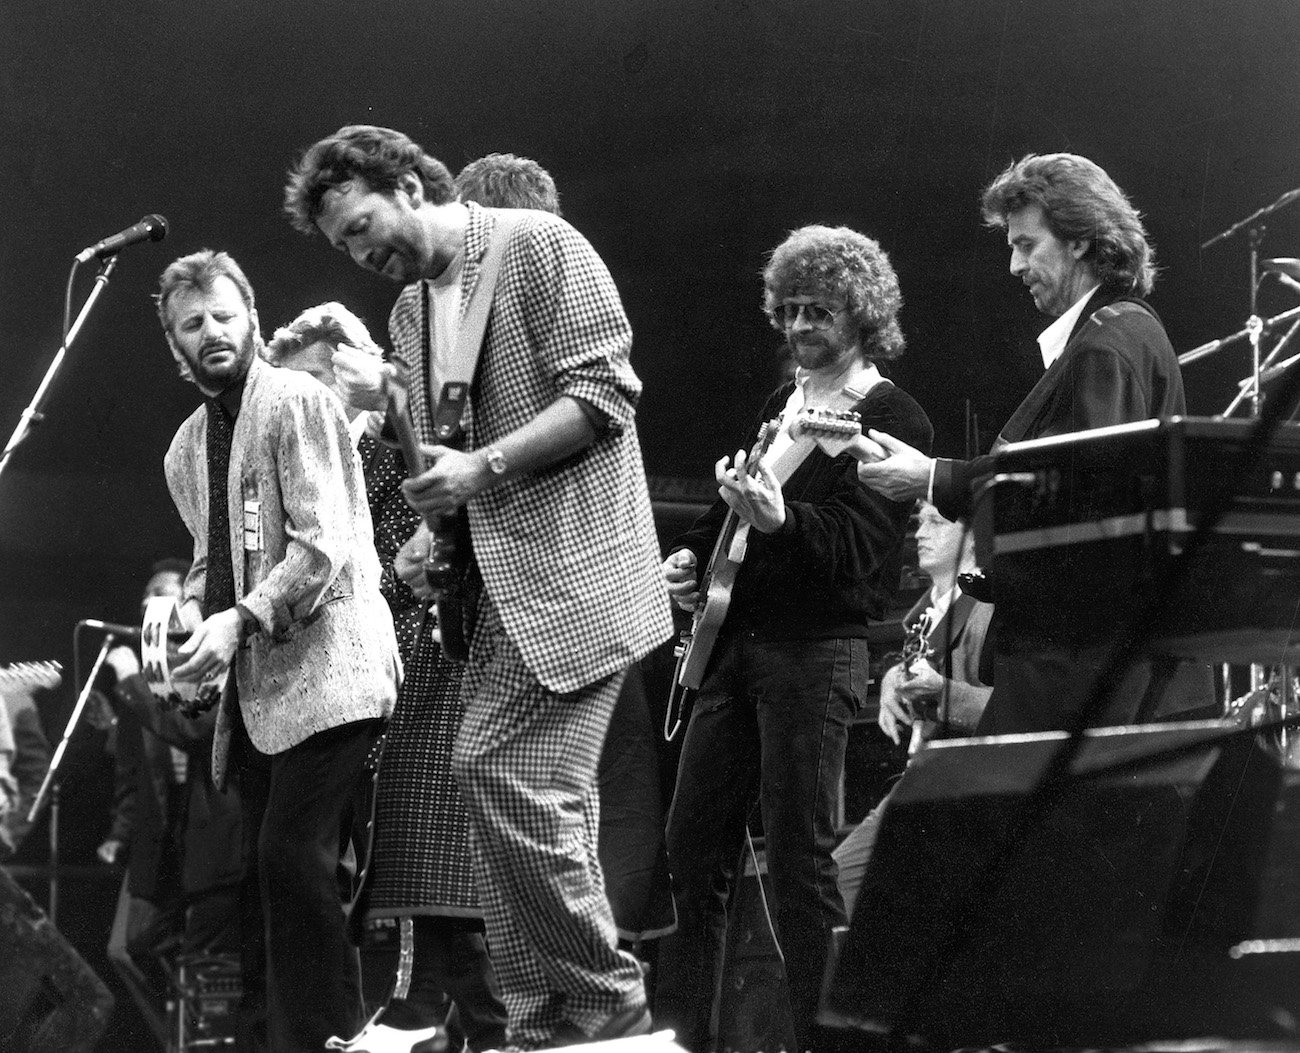 Ringo Starr, Eric Clapton, Jeff Lynne, and George Harrison performing at the Prince's Trust Concert in 1987.